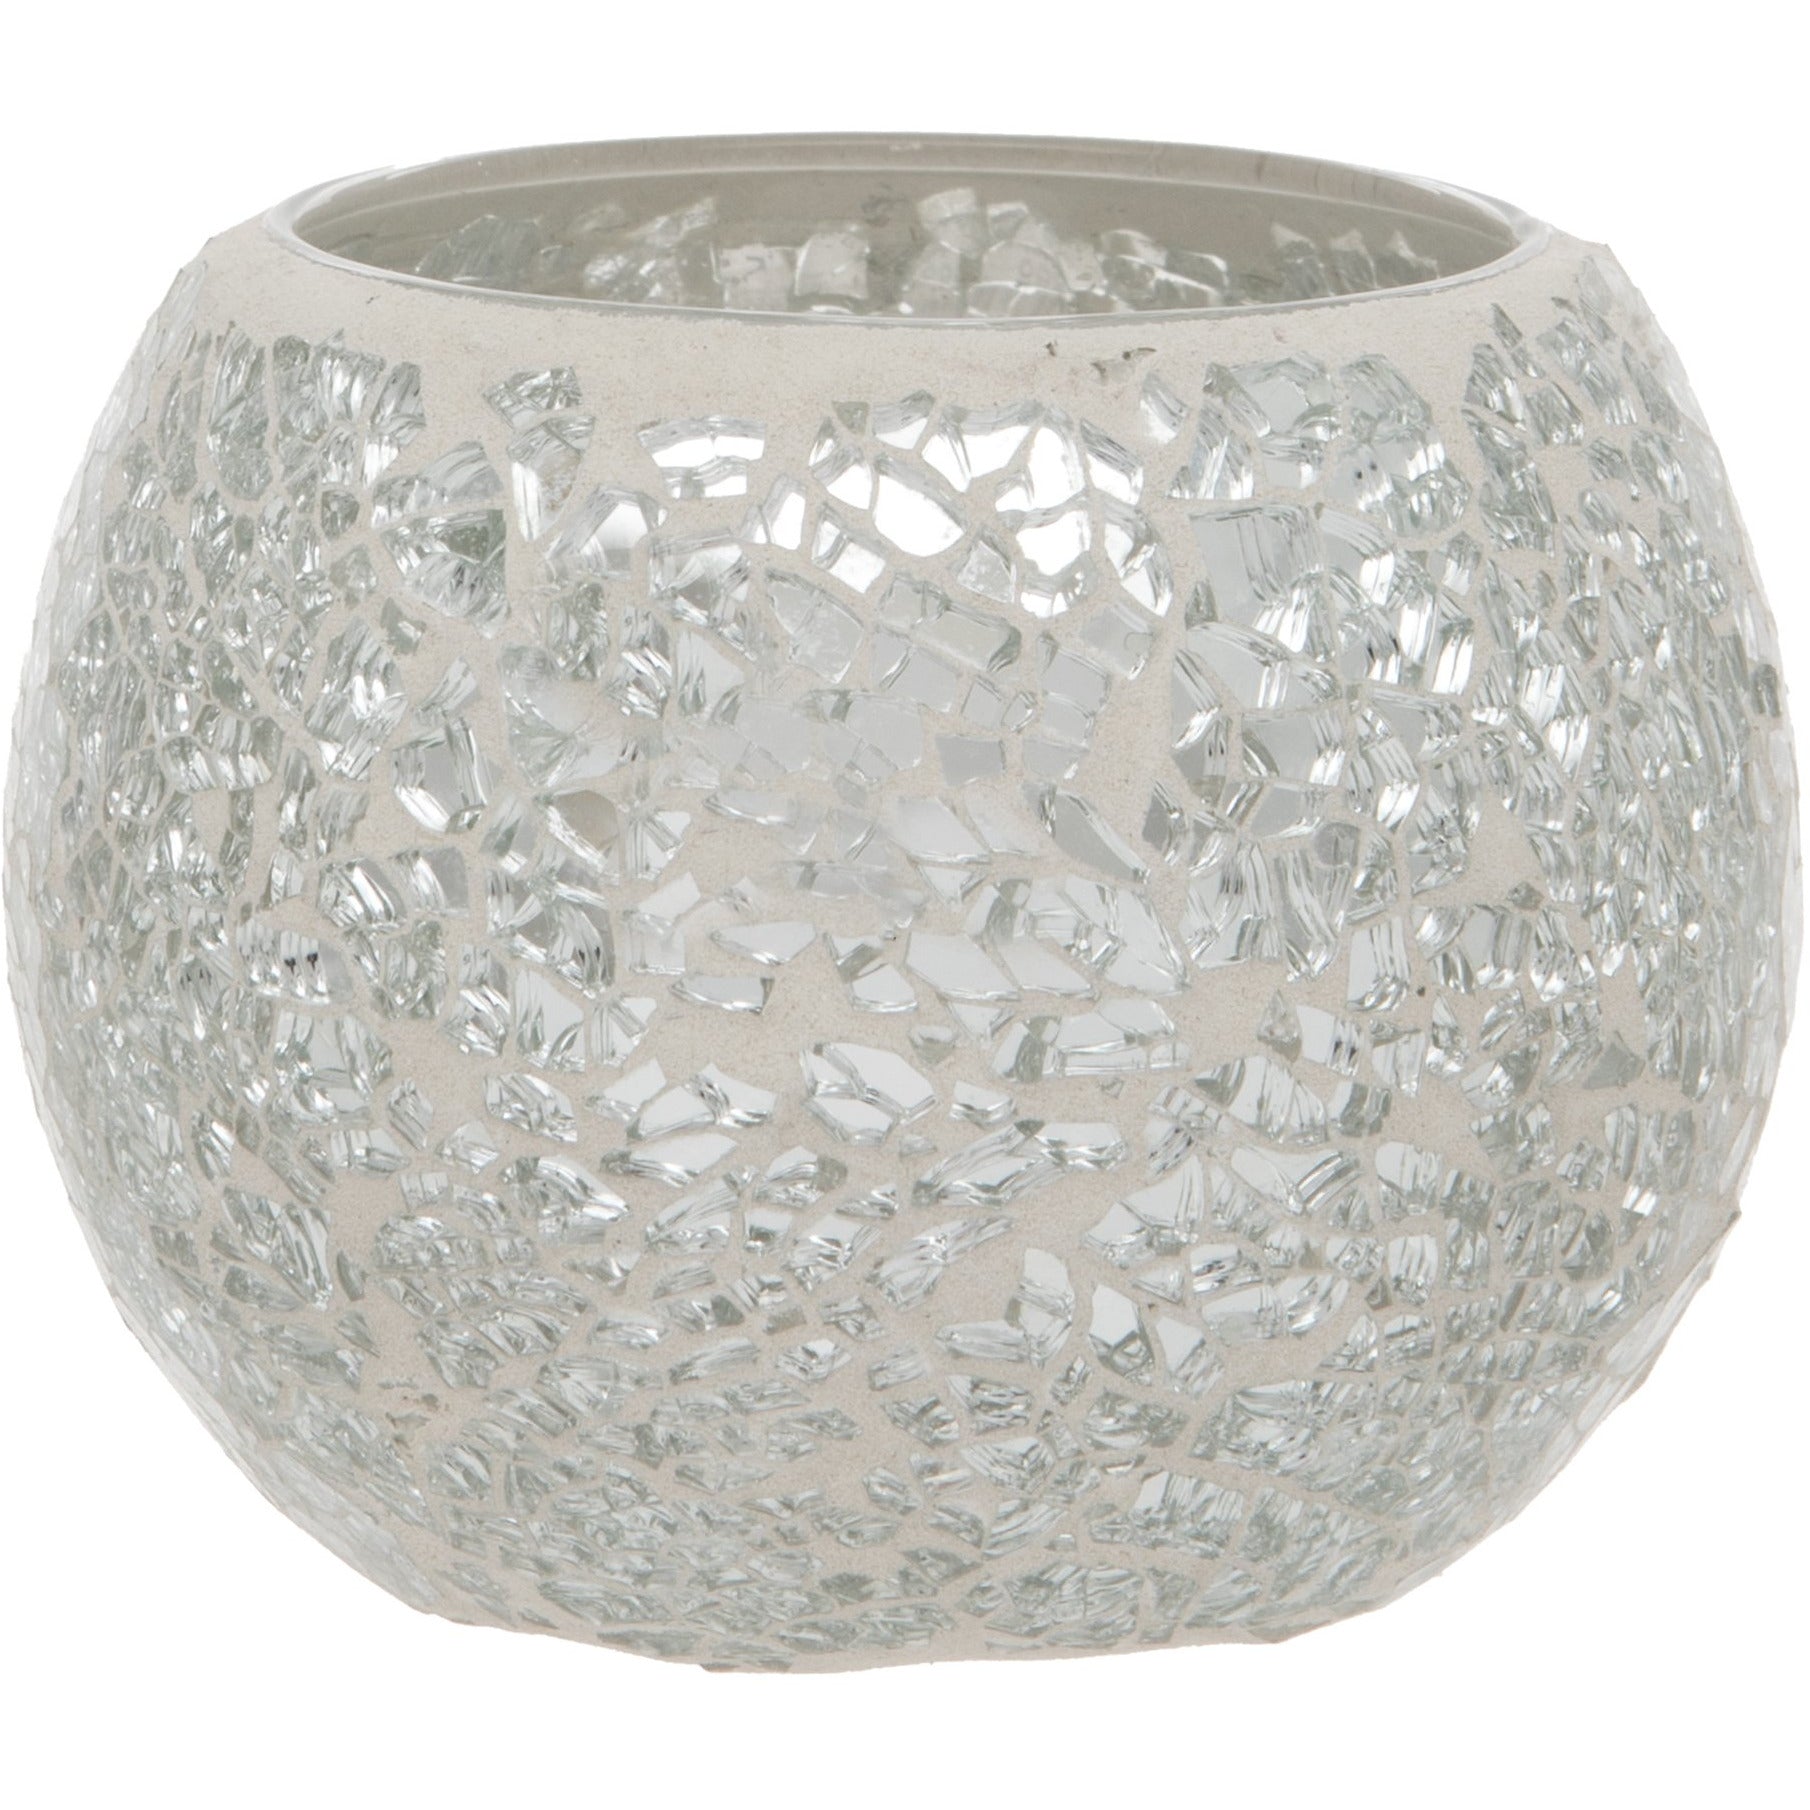 Silver Crackled Glass Mosaic Tealight Holder